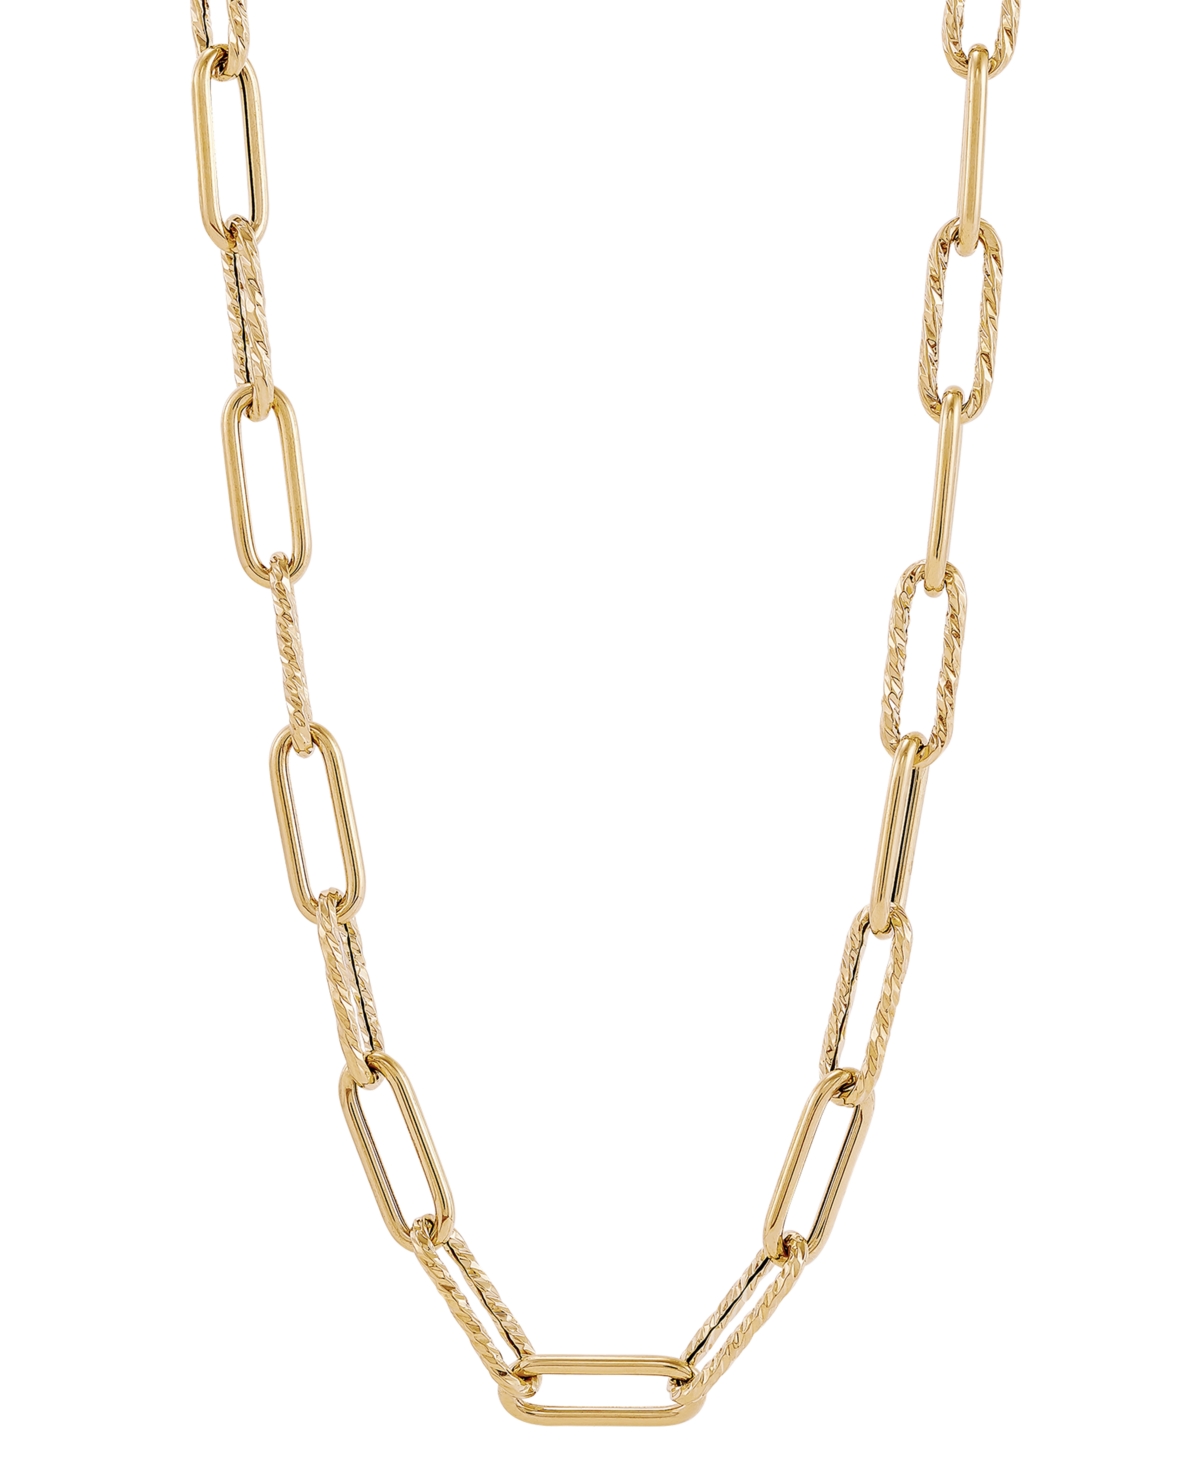 Polished Paperclip Tube Link 22" Chain Necklace in 14k Gold, Created for Macy's - Yellow Gold